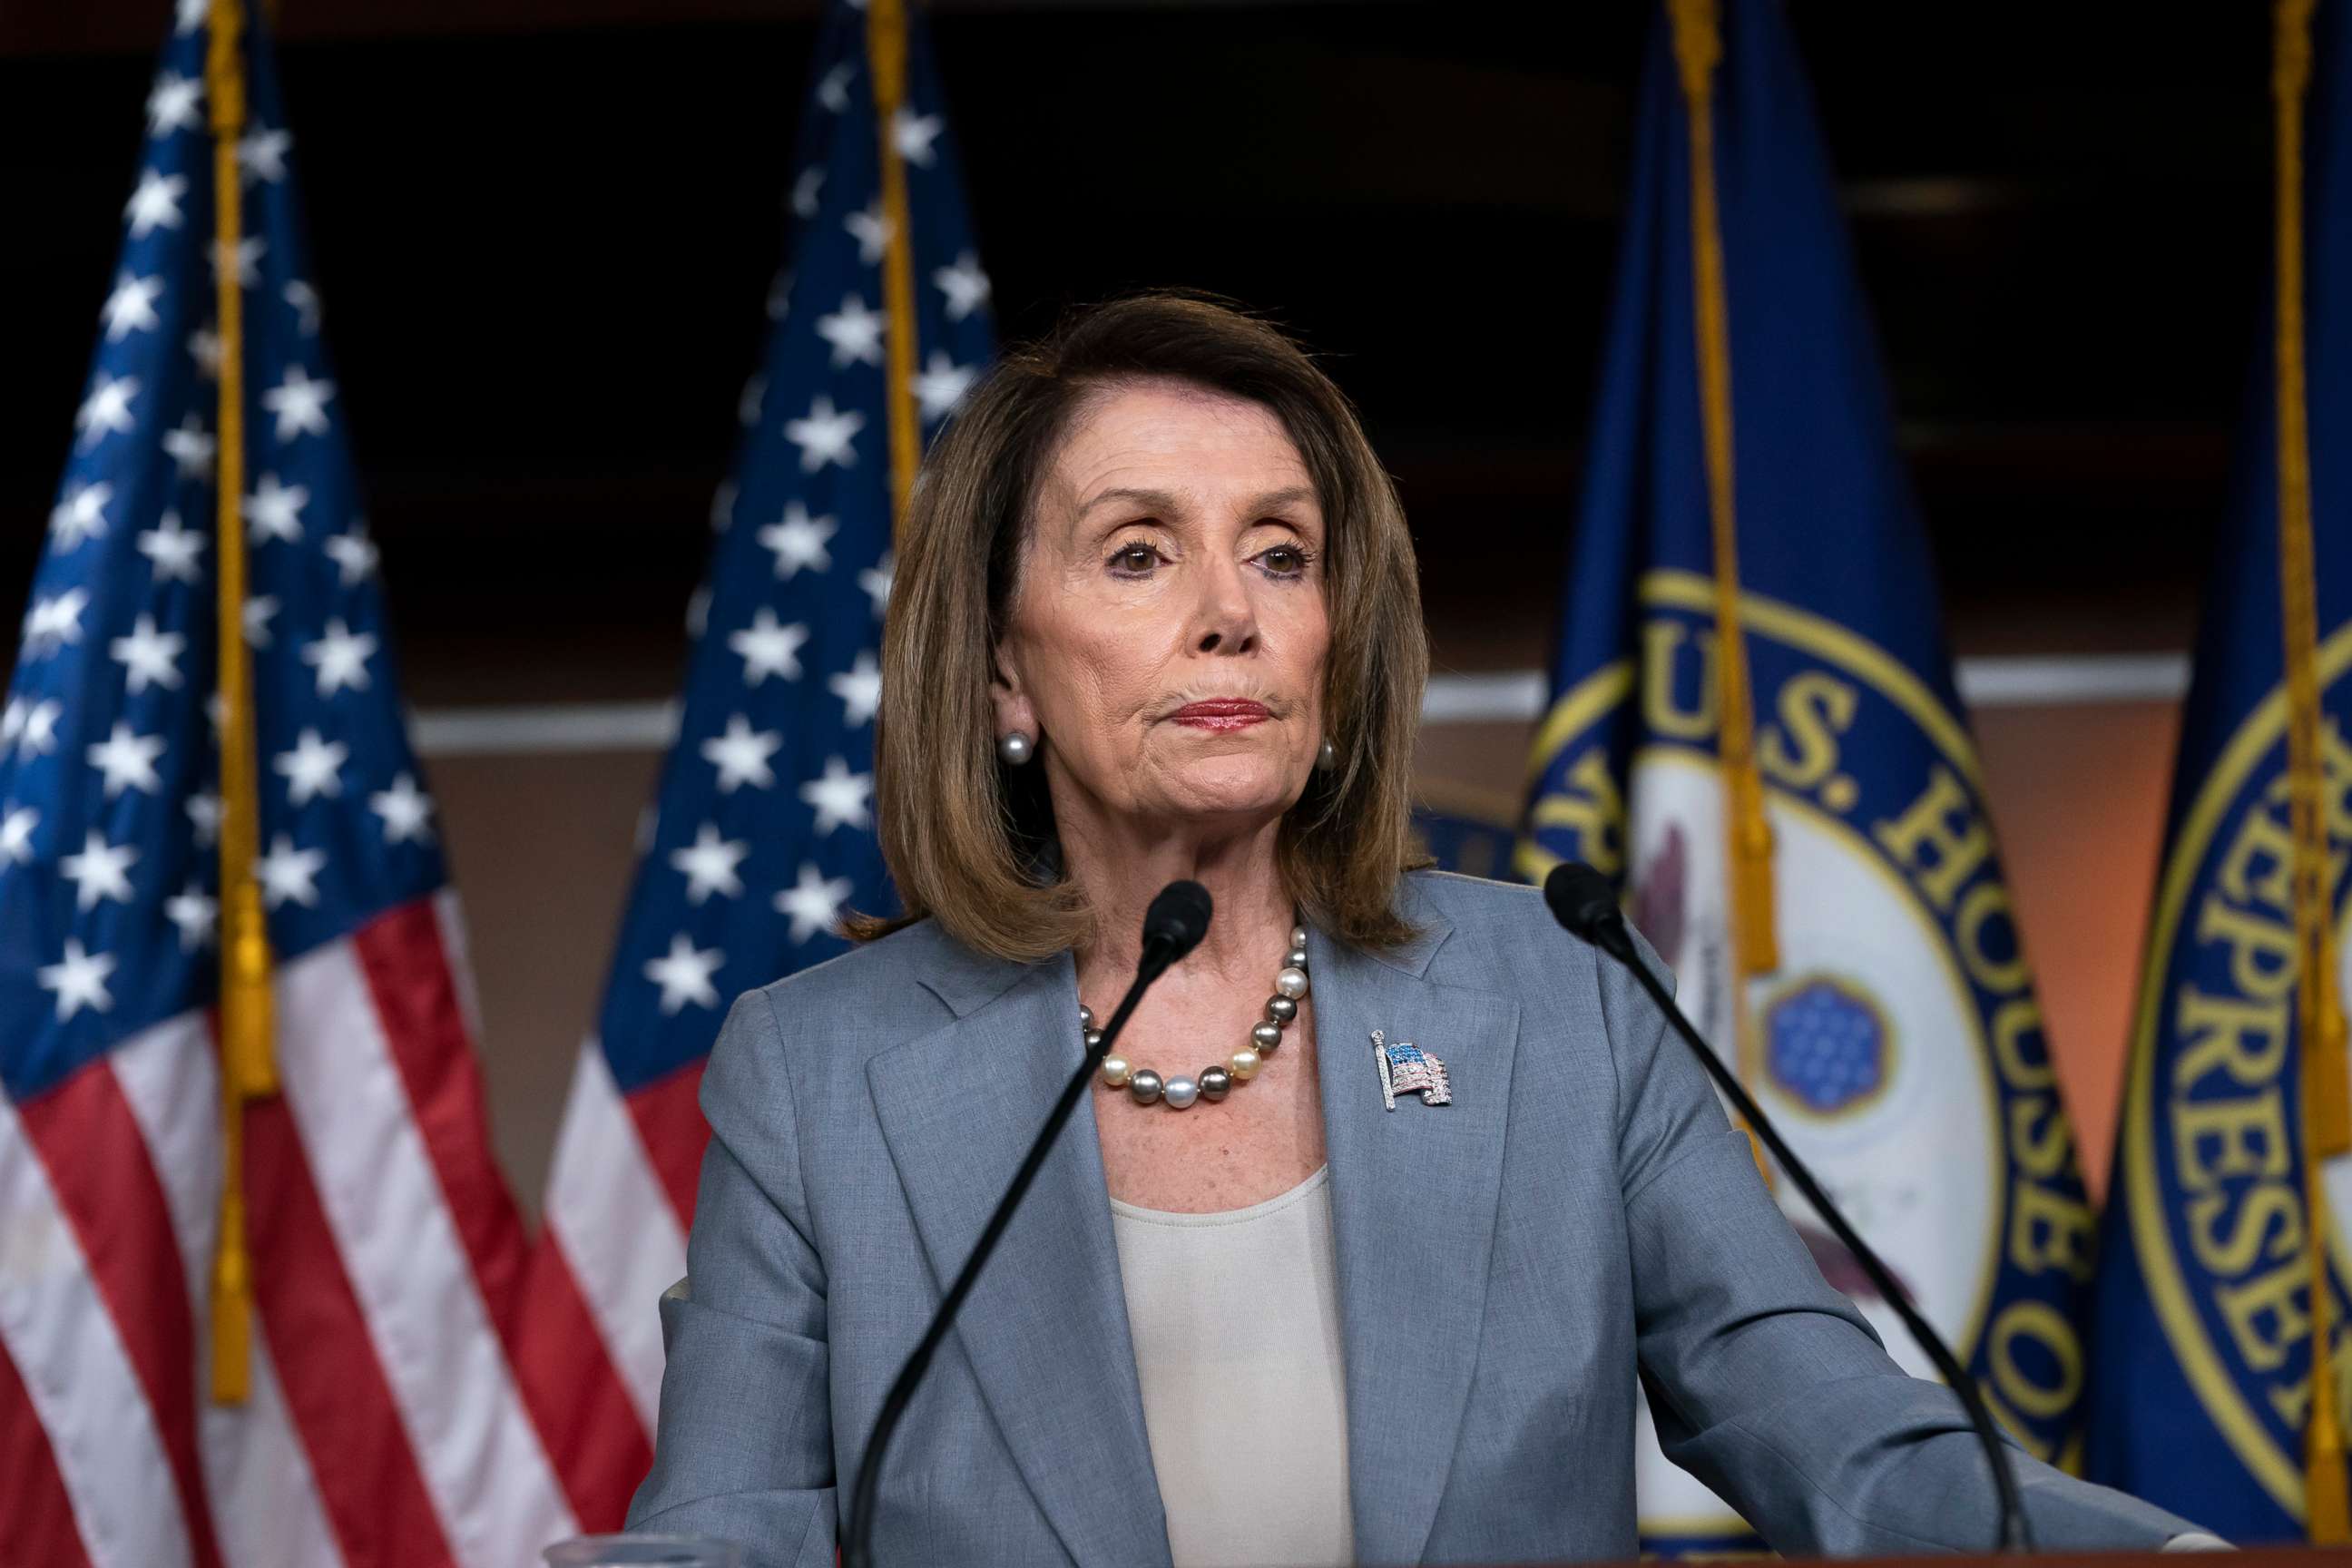 PHOTO: Speaker of the House Nancy Pelosi meets with reporters the day after the Democrat-controlled House Judiciary Committee voted to hold Attorney General William Barr in contempt of Congress, at a news conference in Washington, May 9, 2019.